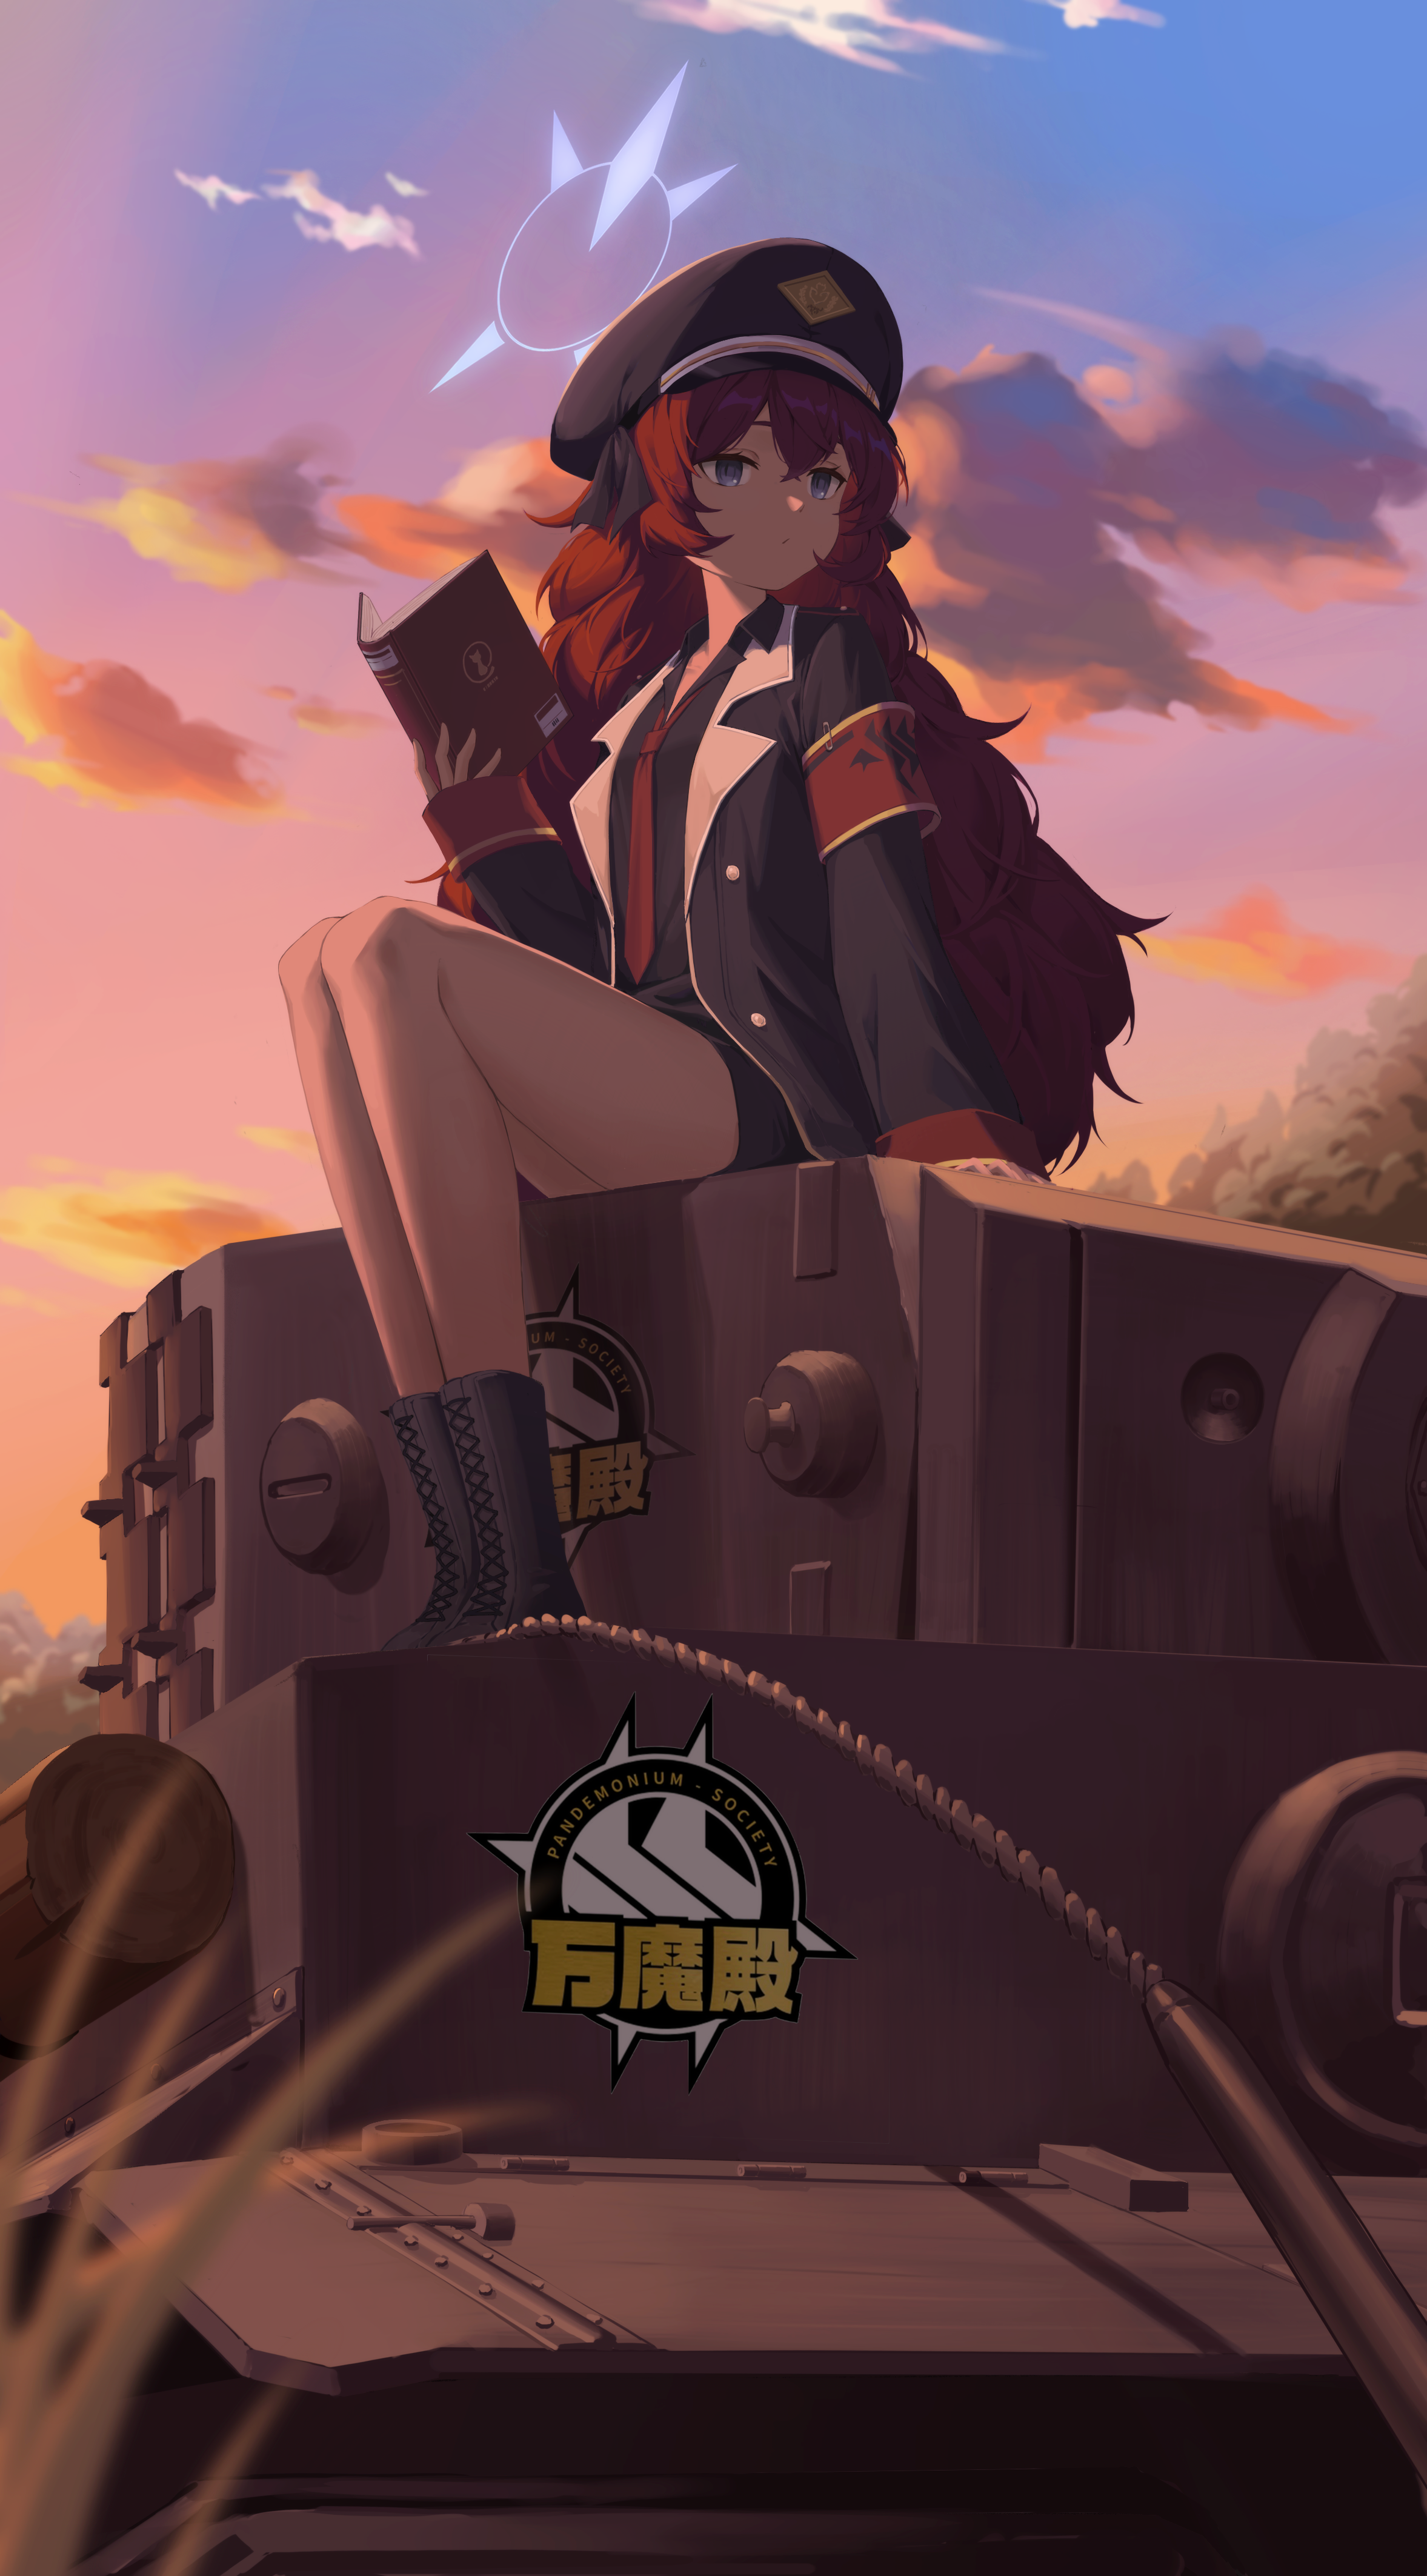 Anime 2355x4251 anime anime girls Blue Archive looking away Natsume Iroha (Blue Archive) Gaoqiaoyuyin Takahashi portrait display redhead hair between eyes clouds blue eyes closed mouth long hair bent legs boots sky sunset sunset glow sunlight sitting tie tank uniform book in hand books orange sky outdoors women outdoors